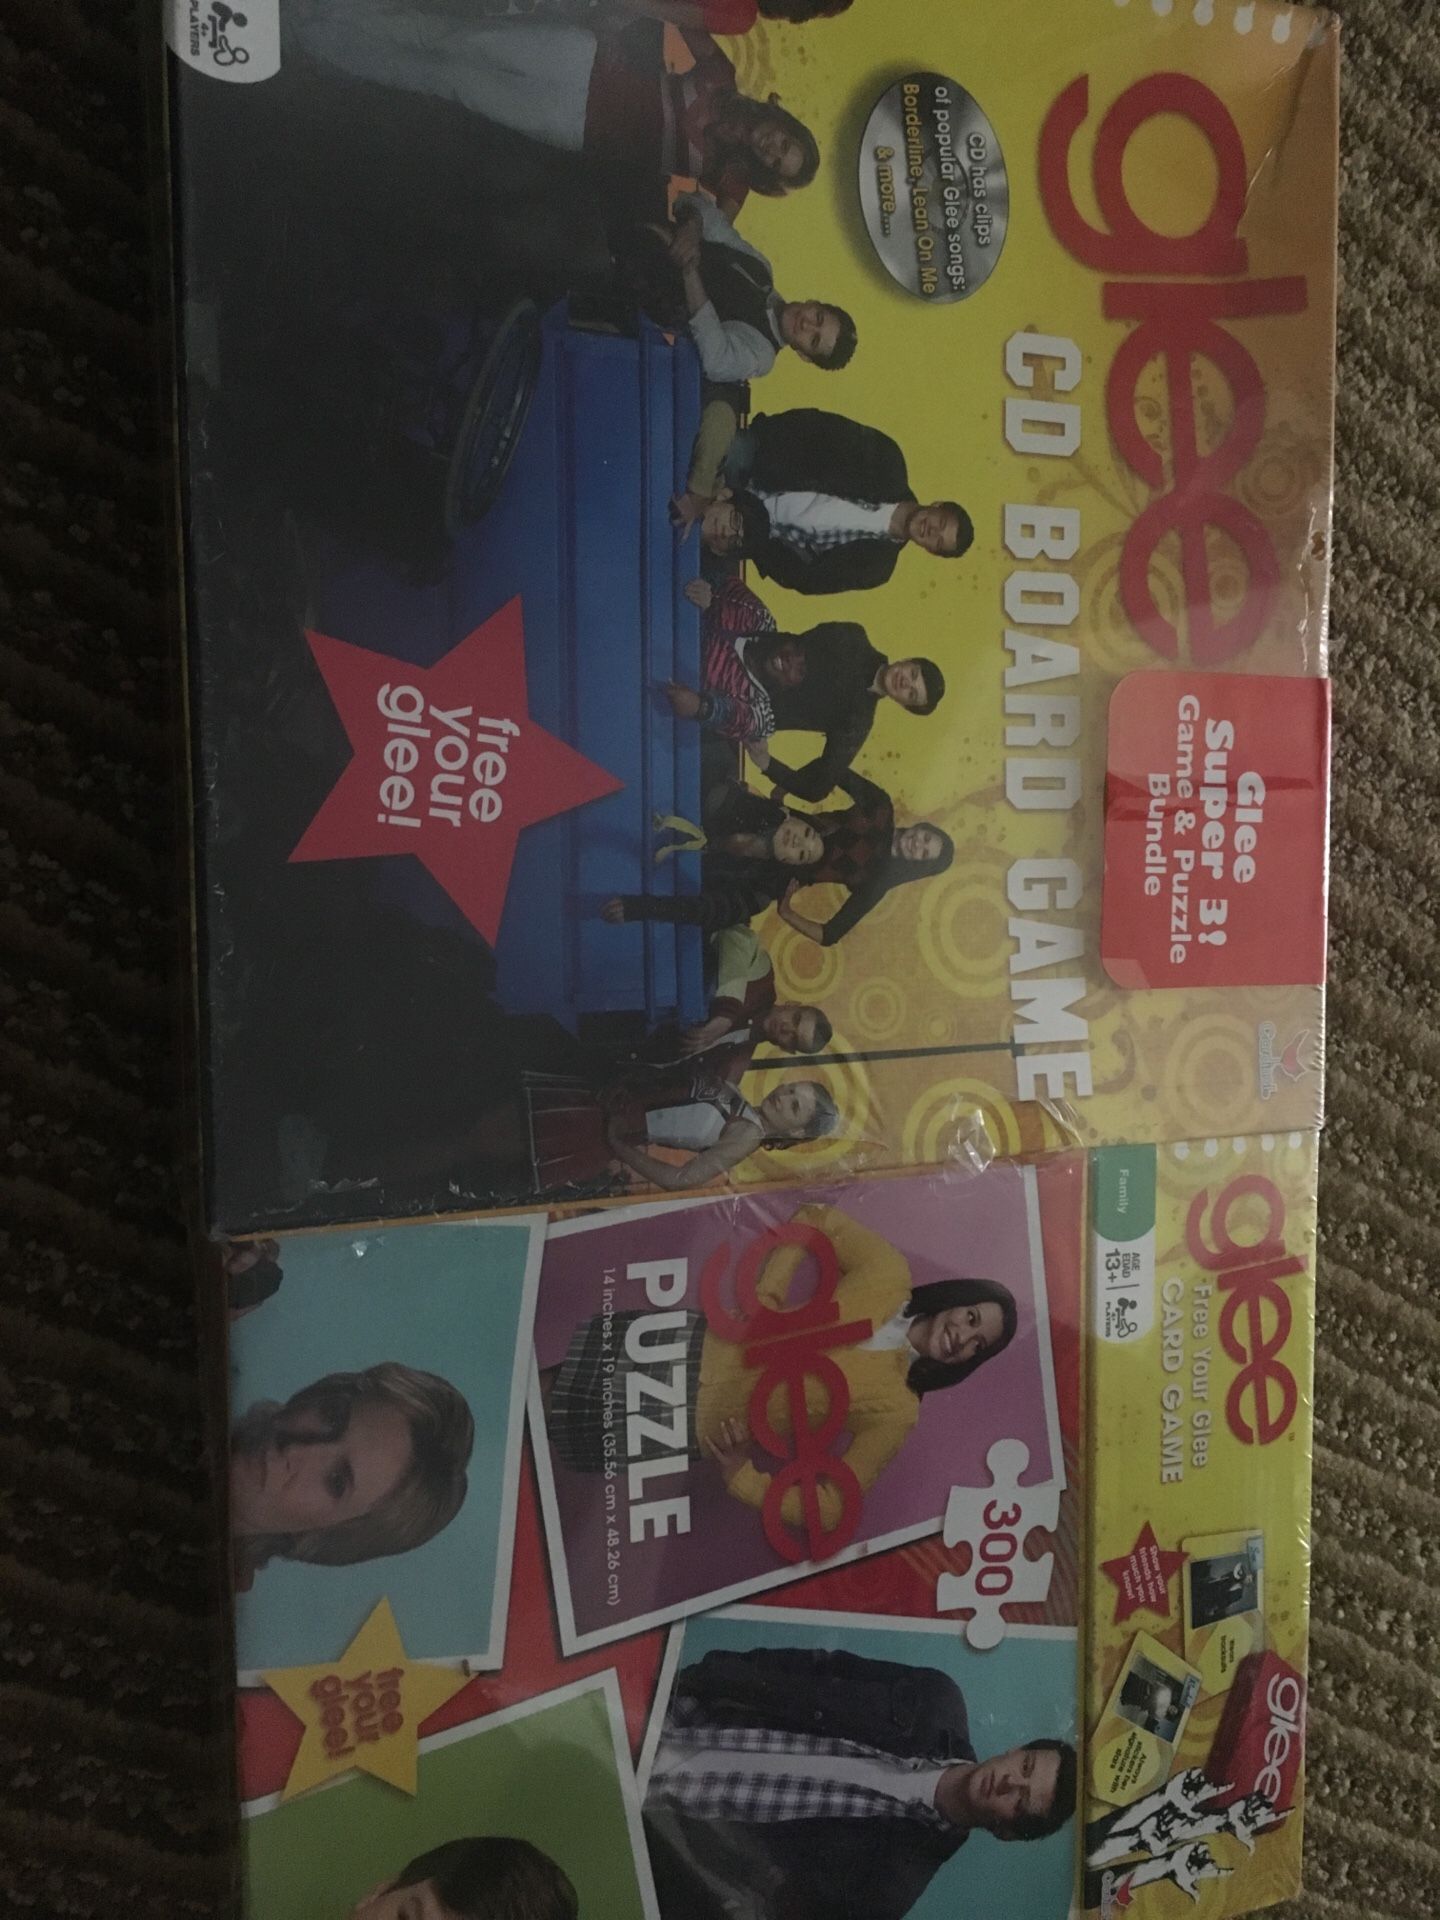 Glee TV show 3 in 1 puzzle, card game and board game